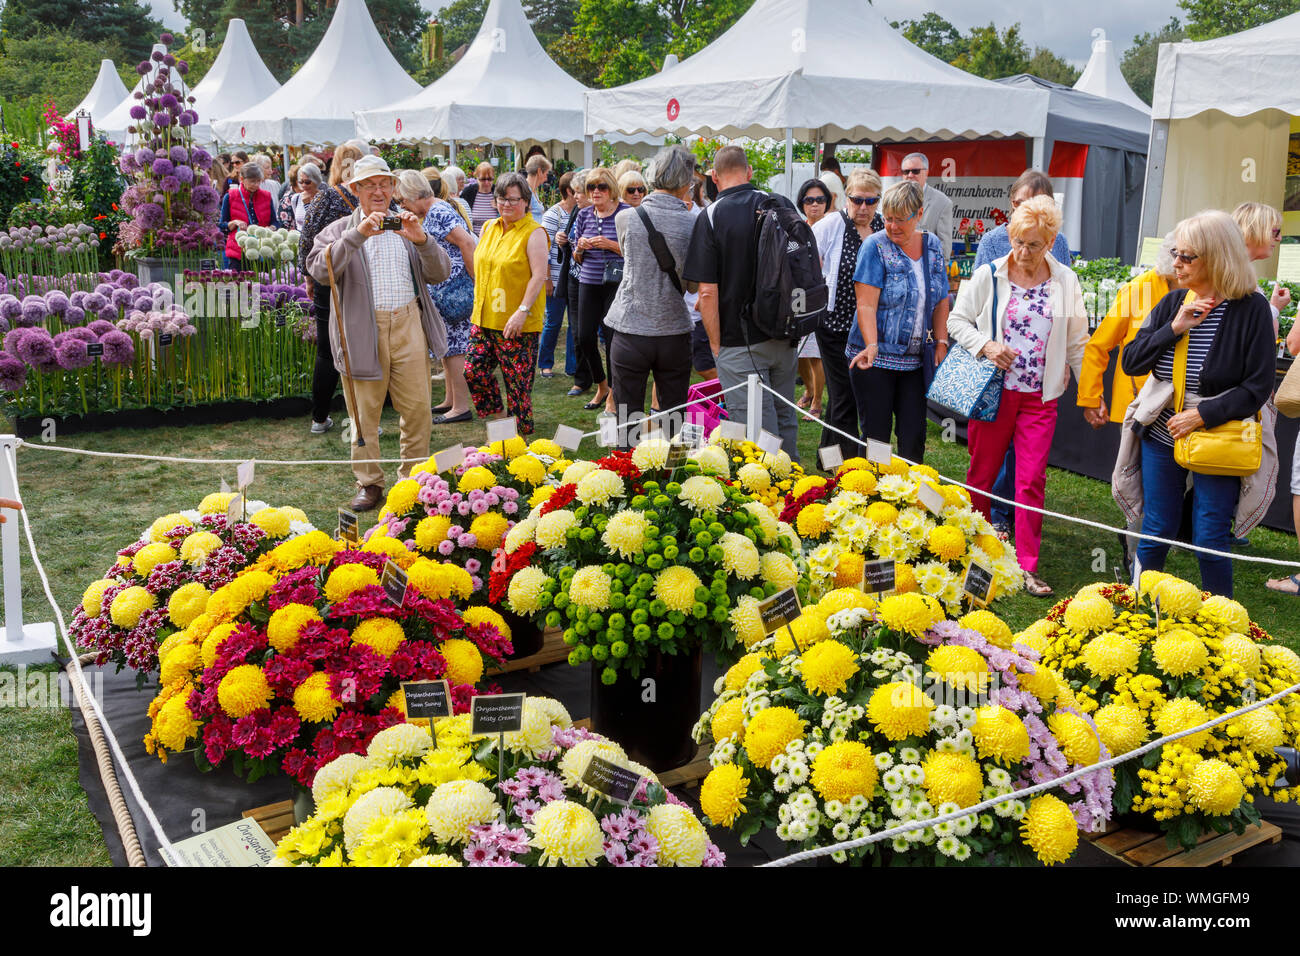 Display of chrysanthemum flowers at a stall at the September 2019 Wisley Garden Flower Show at RHS Garden Wisley, Surrey, south-east England Stock Photo